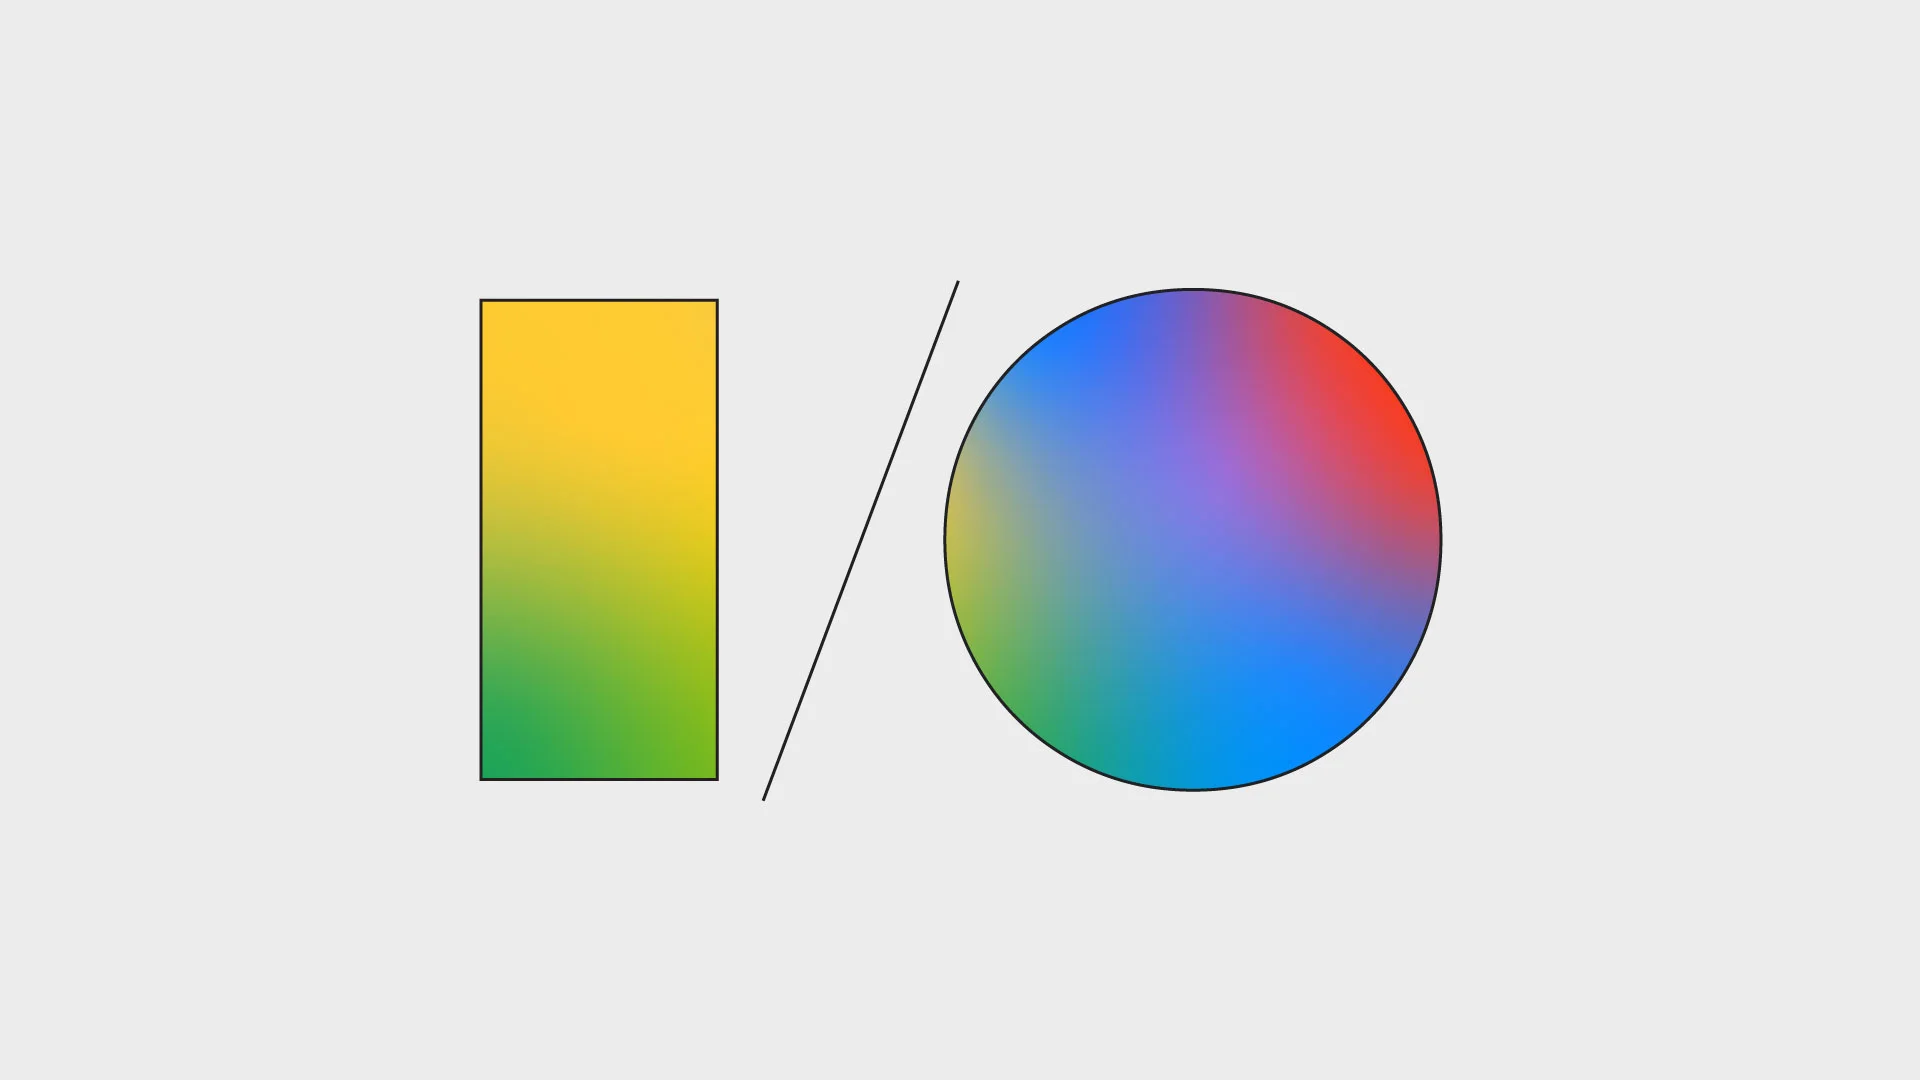 The letters I / O form the Google I/O logo with gradient colors filled in.